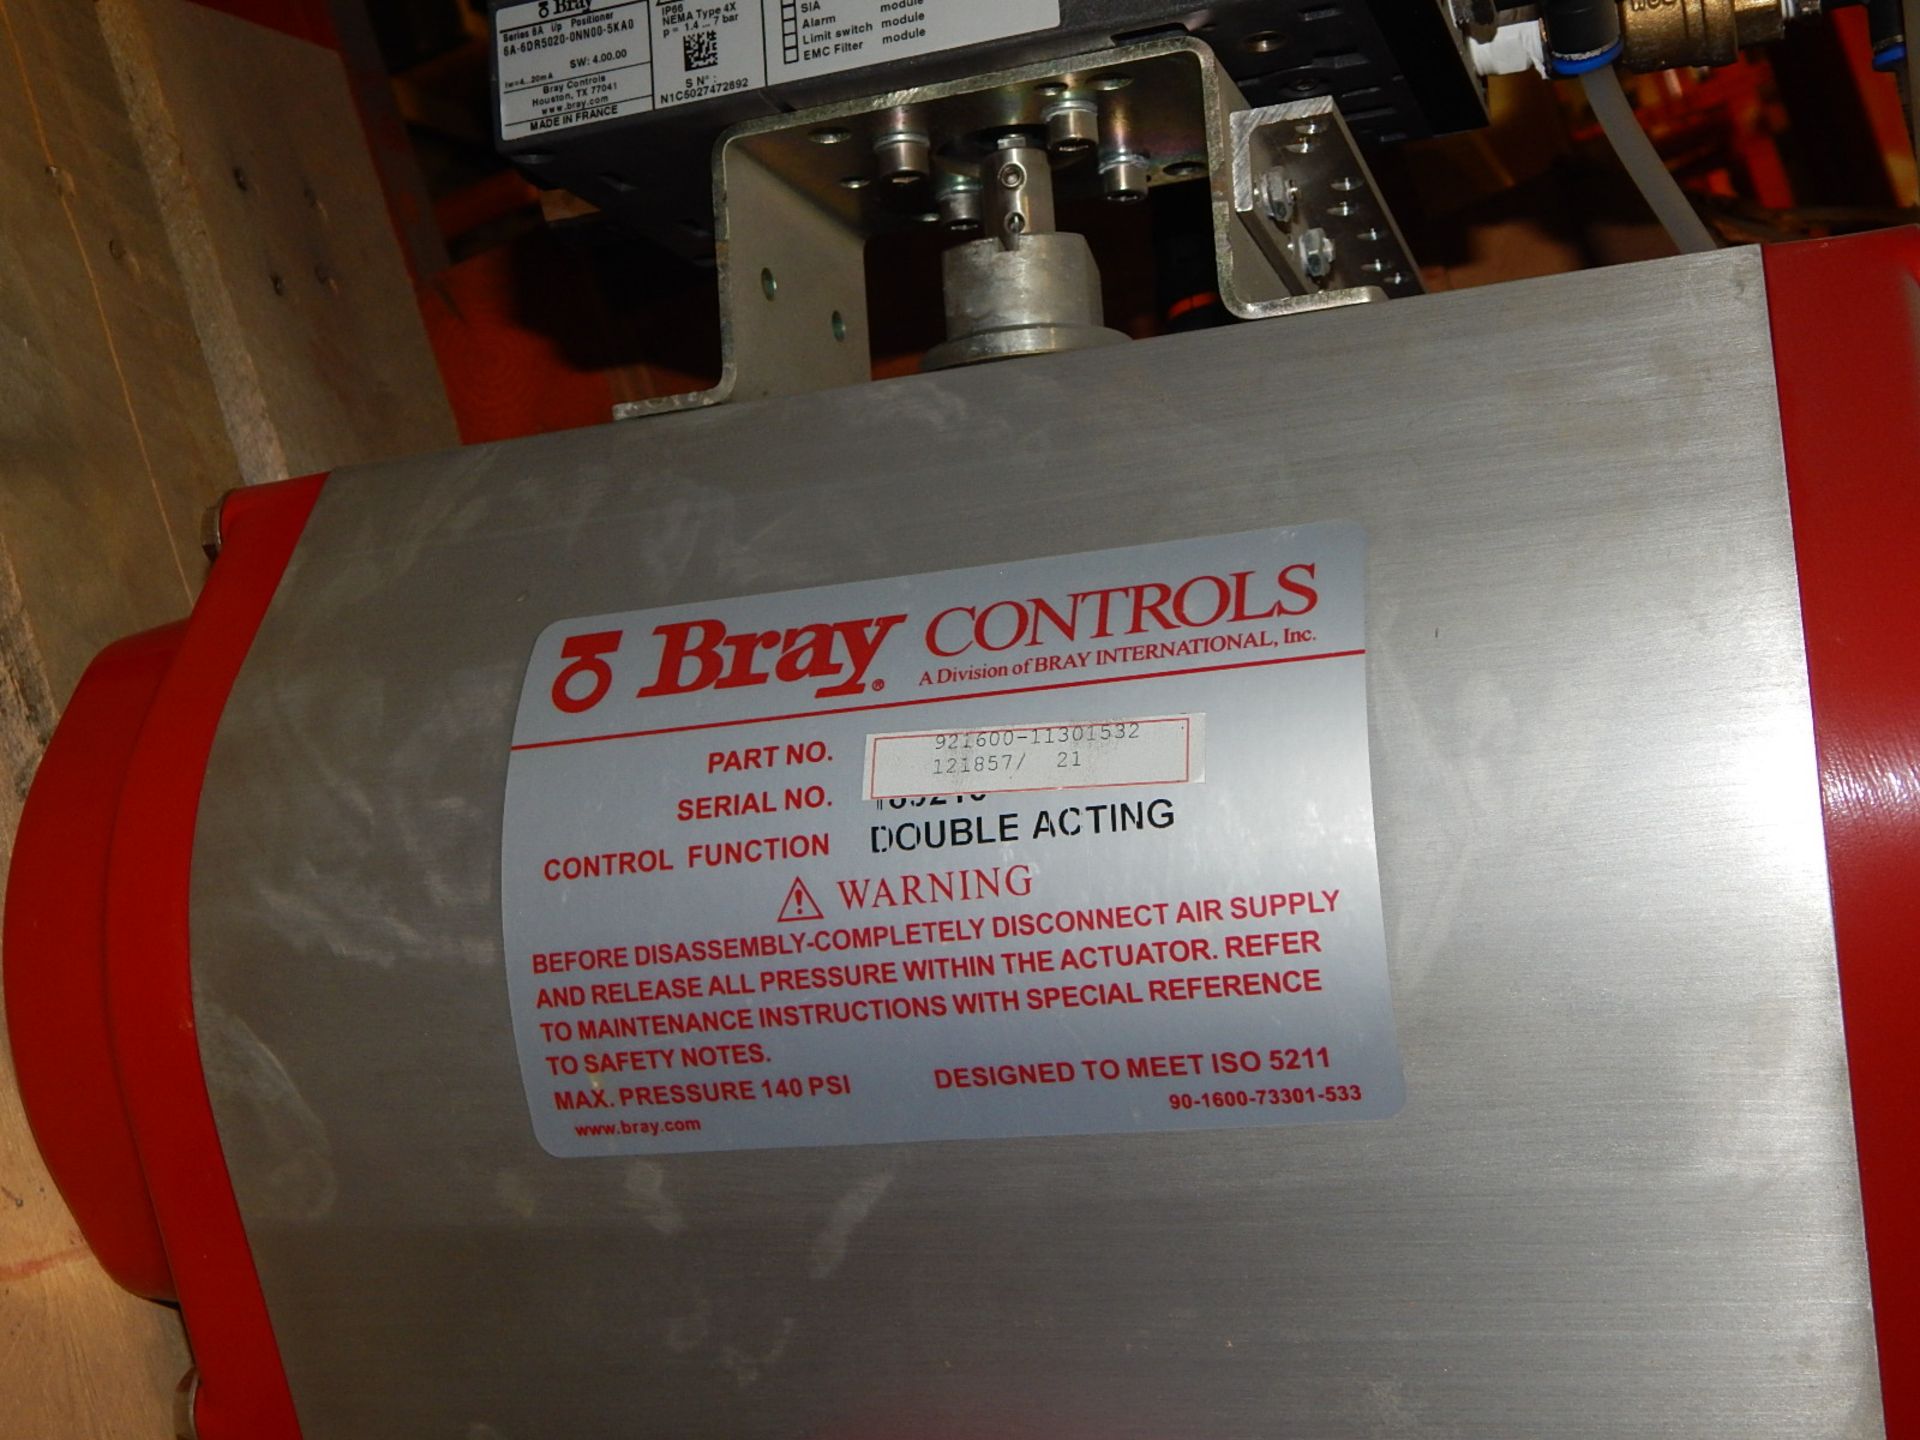 LOT/ BRAY CONTROLS DOUBLE ACTING RELIEF VALVES (CMD) - Image 4 of 4